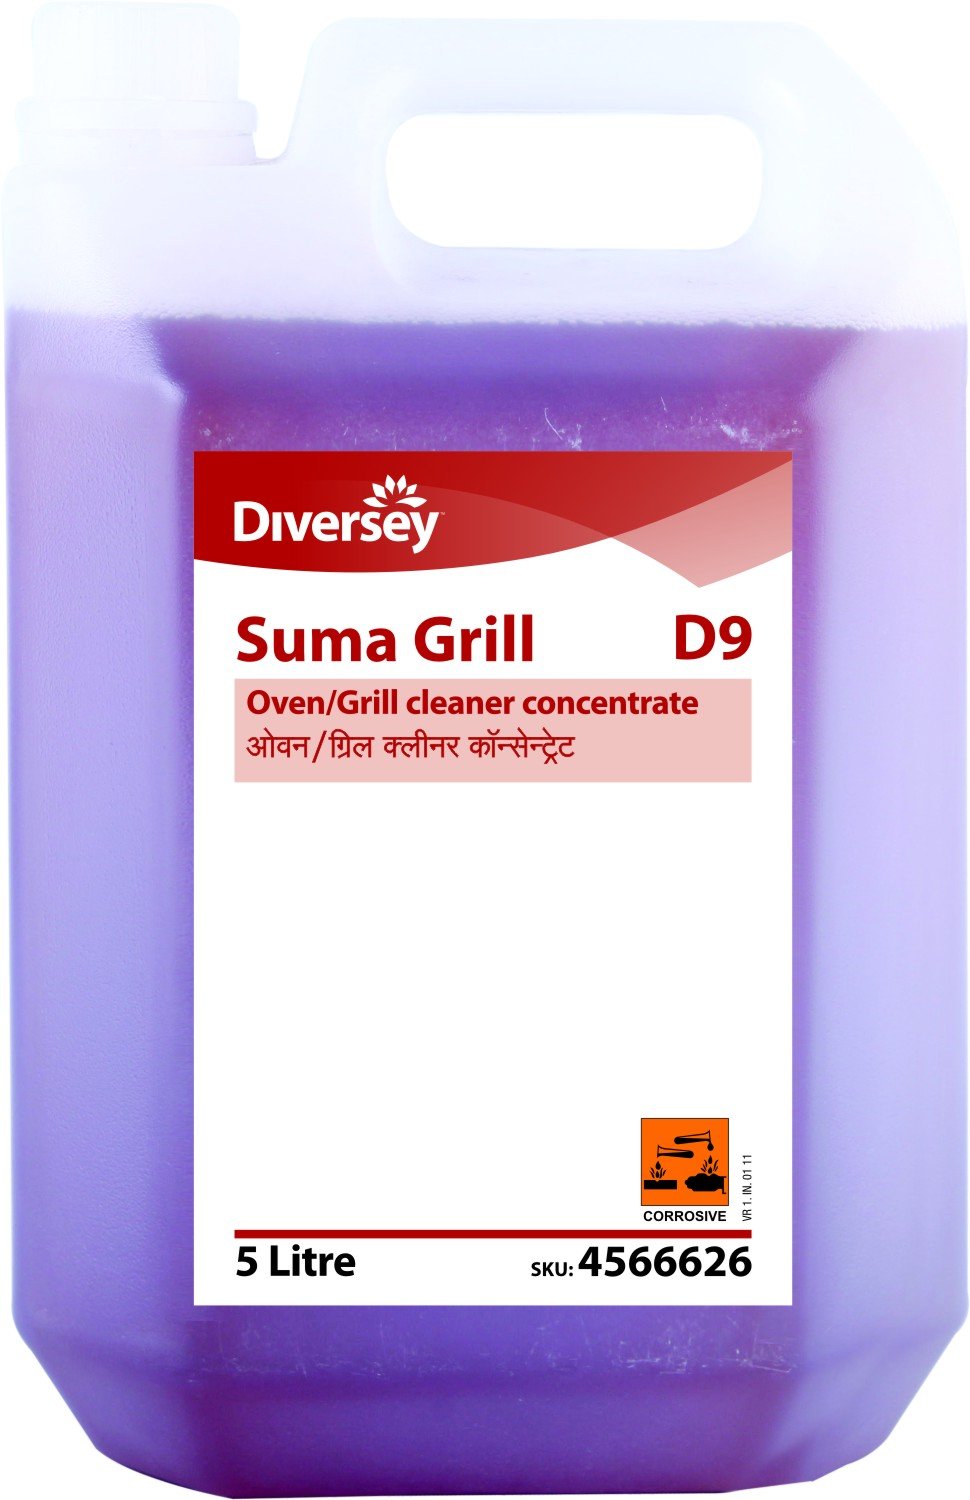 suma-grill-d9-oven-grill-cleaner-concentrate-5-ltr-taski